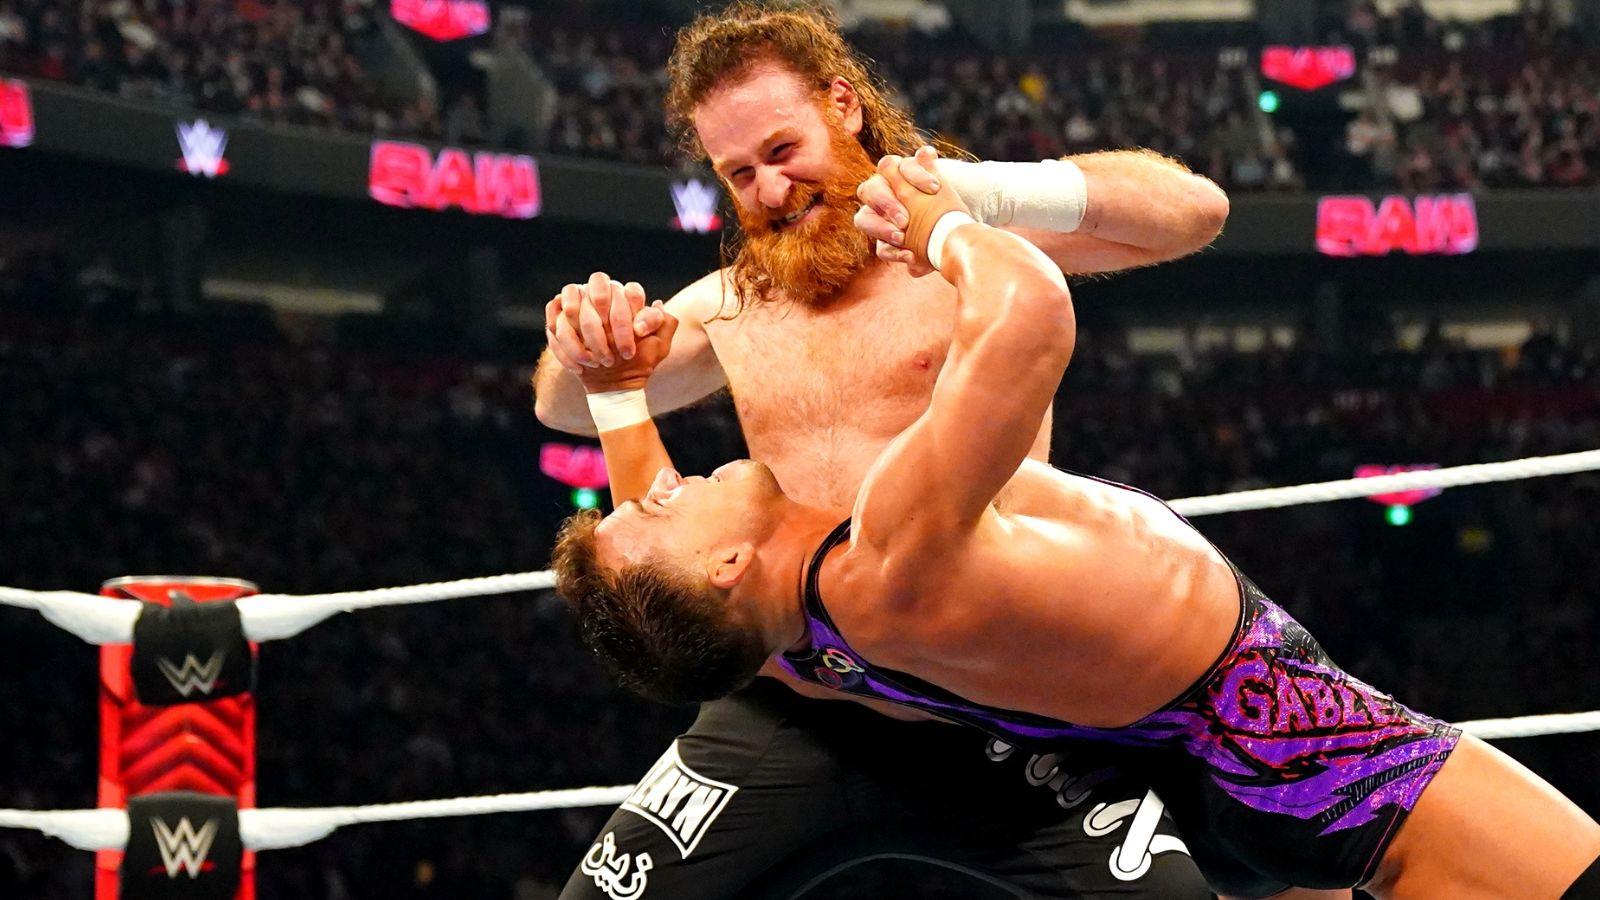 Sami Zayn wrestling against Chad Gable on the April 15 episode of WWE RAW.